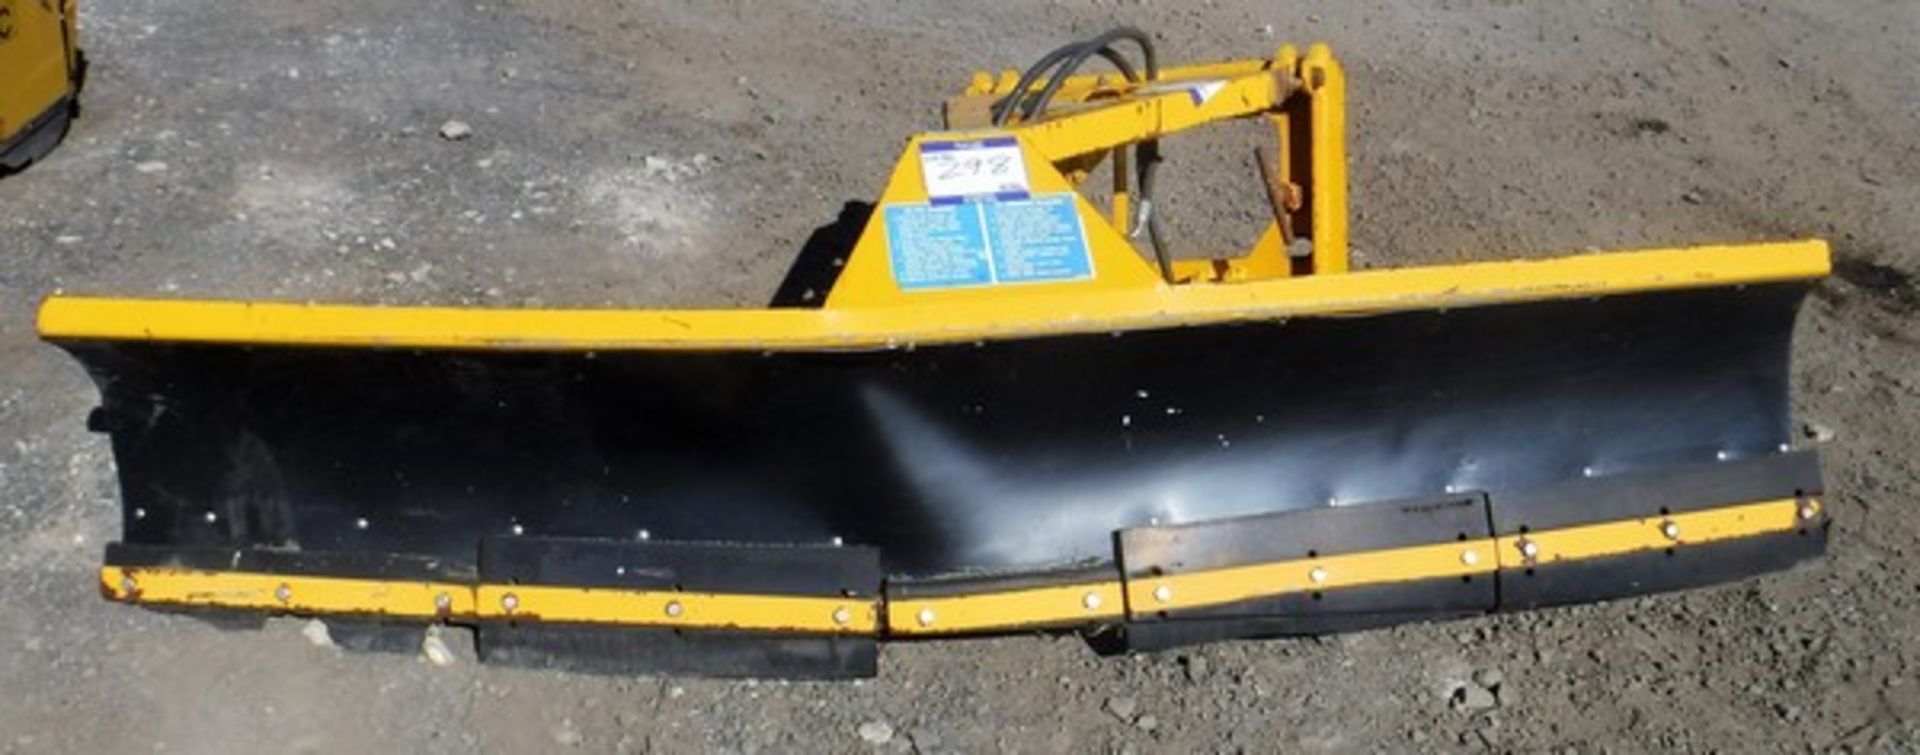 ECON WSR0RR23 snow plough with 9ft blade s/n 37498 - Image 2 of 4